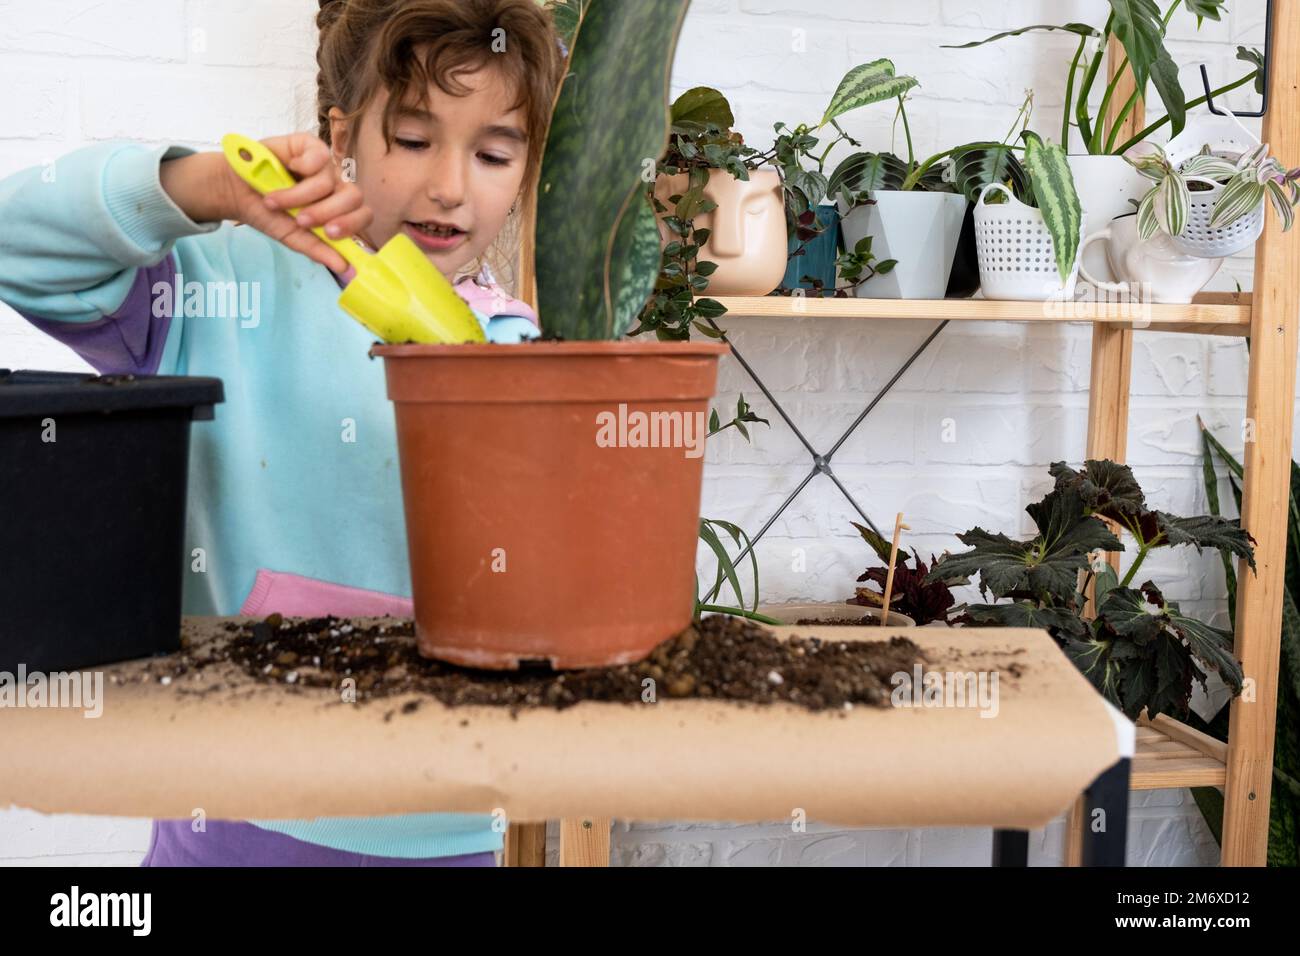 The girl happily takes care of home plants, transplants them into a new soil and pot, embraces the succulent sansivieria, epiphy Stock Photo